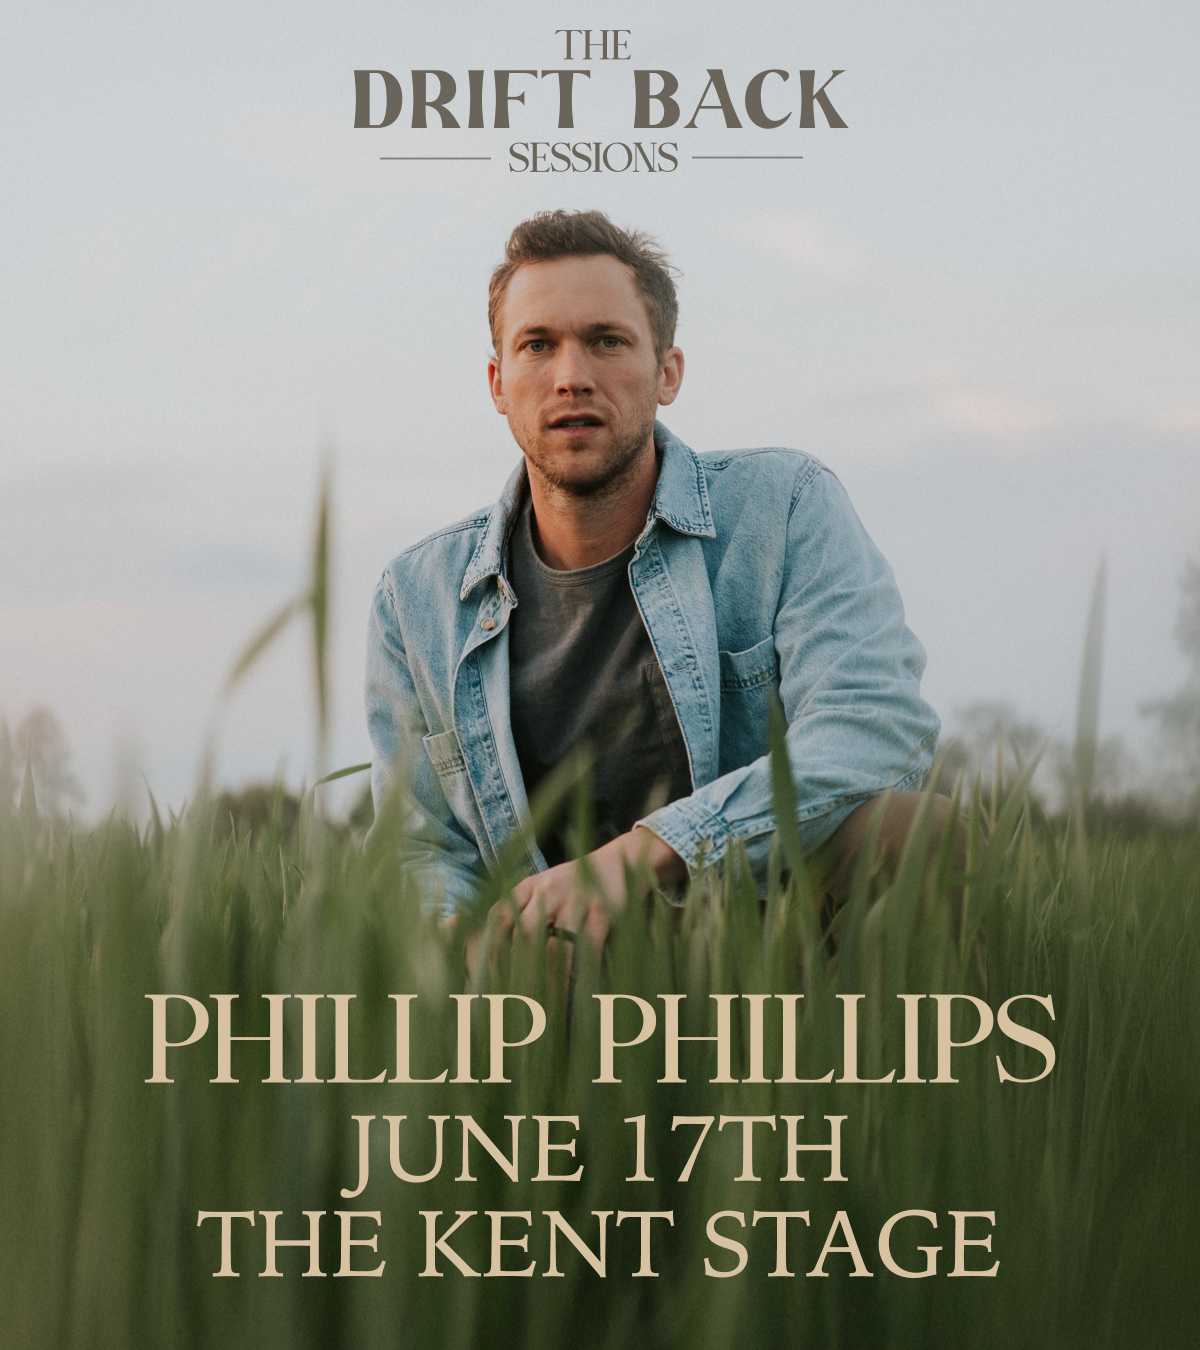 Phillip Phillips - The Drift Back Sessions - | Kent Stage